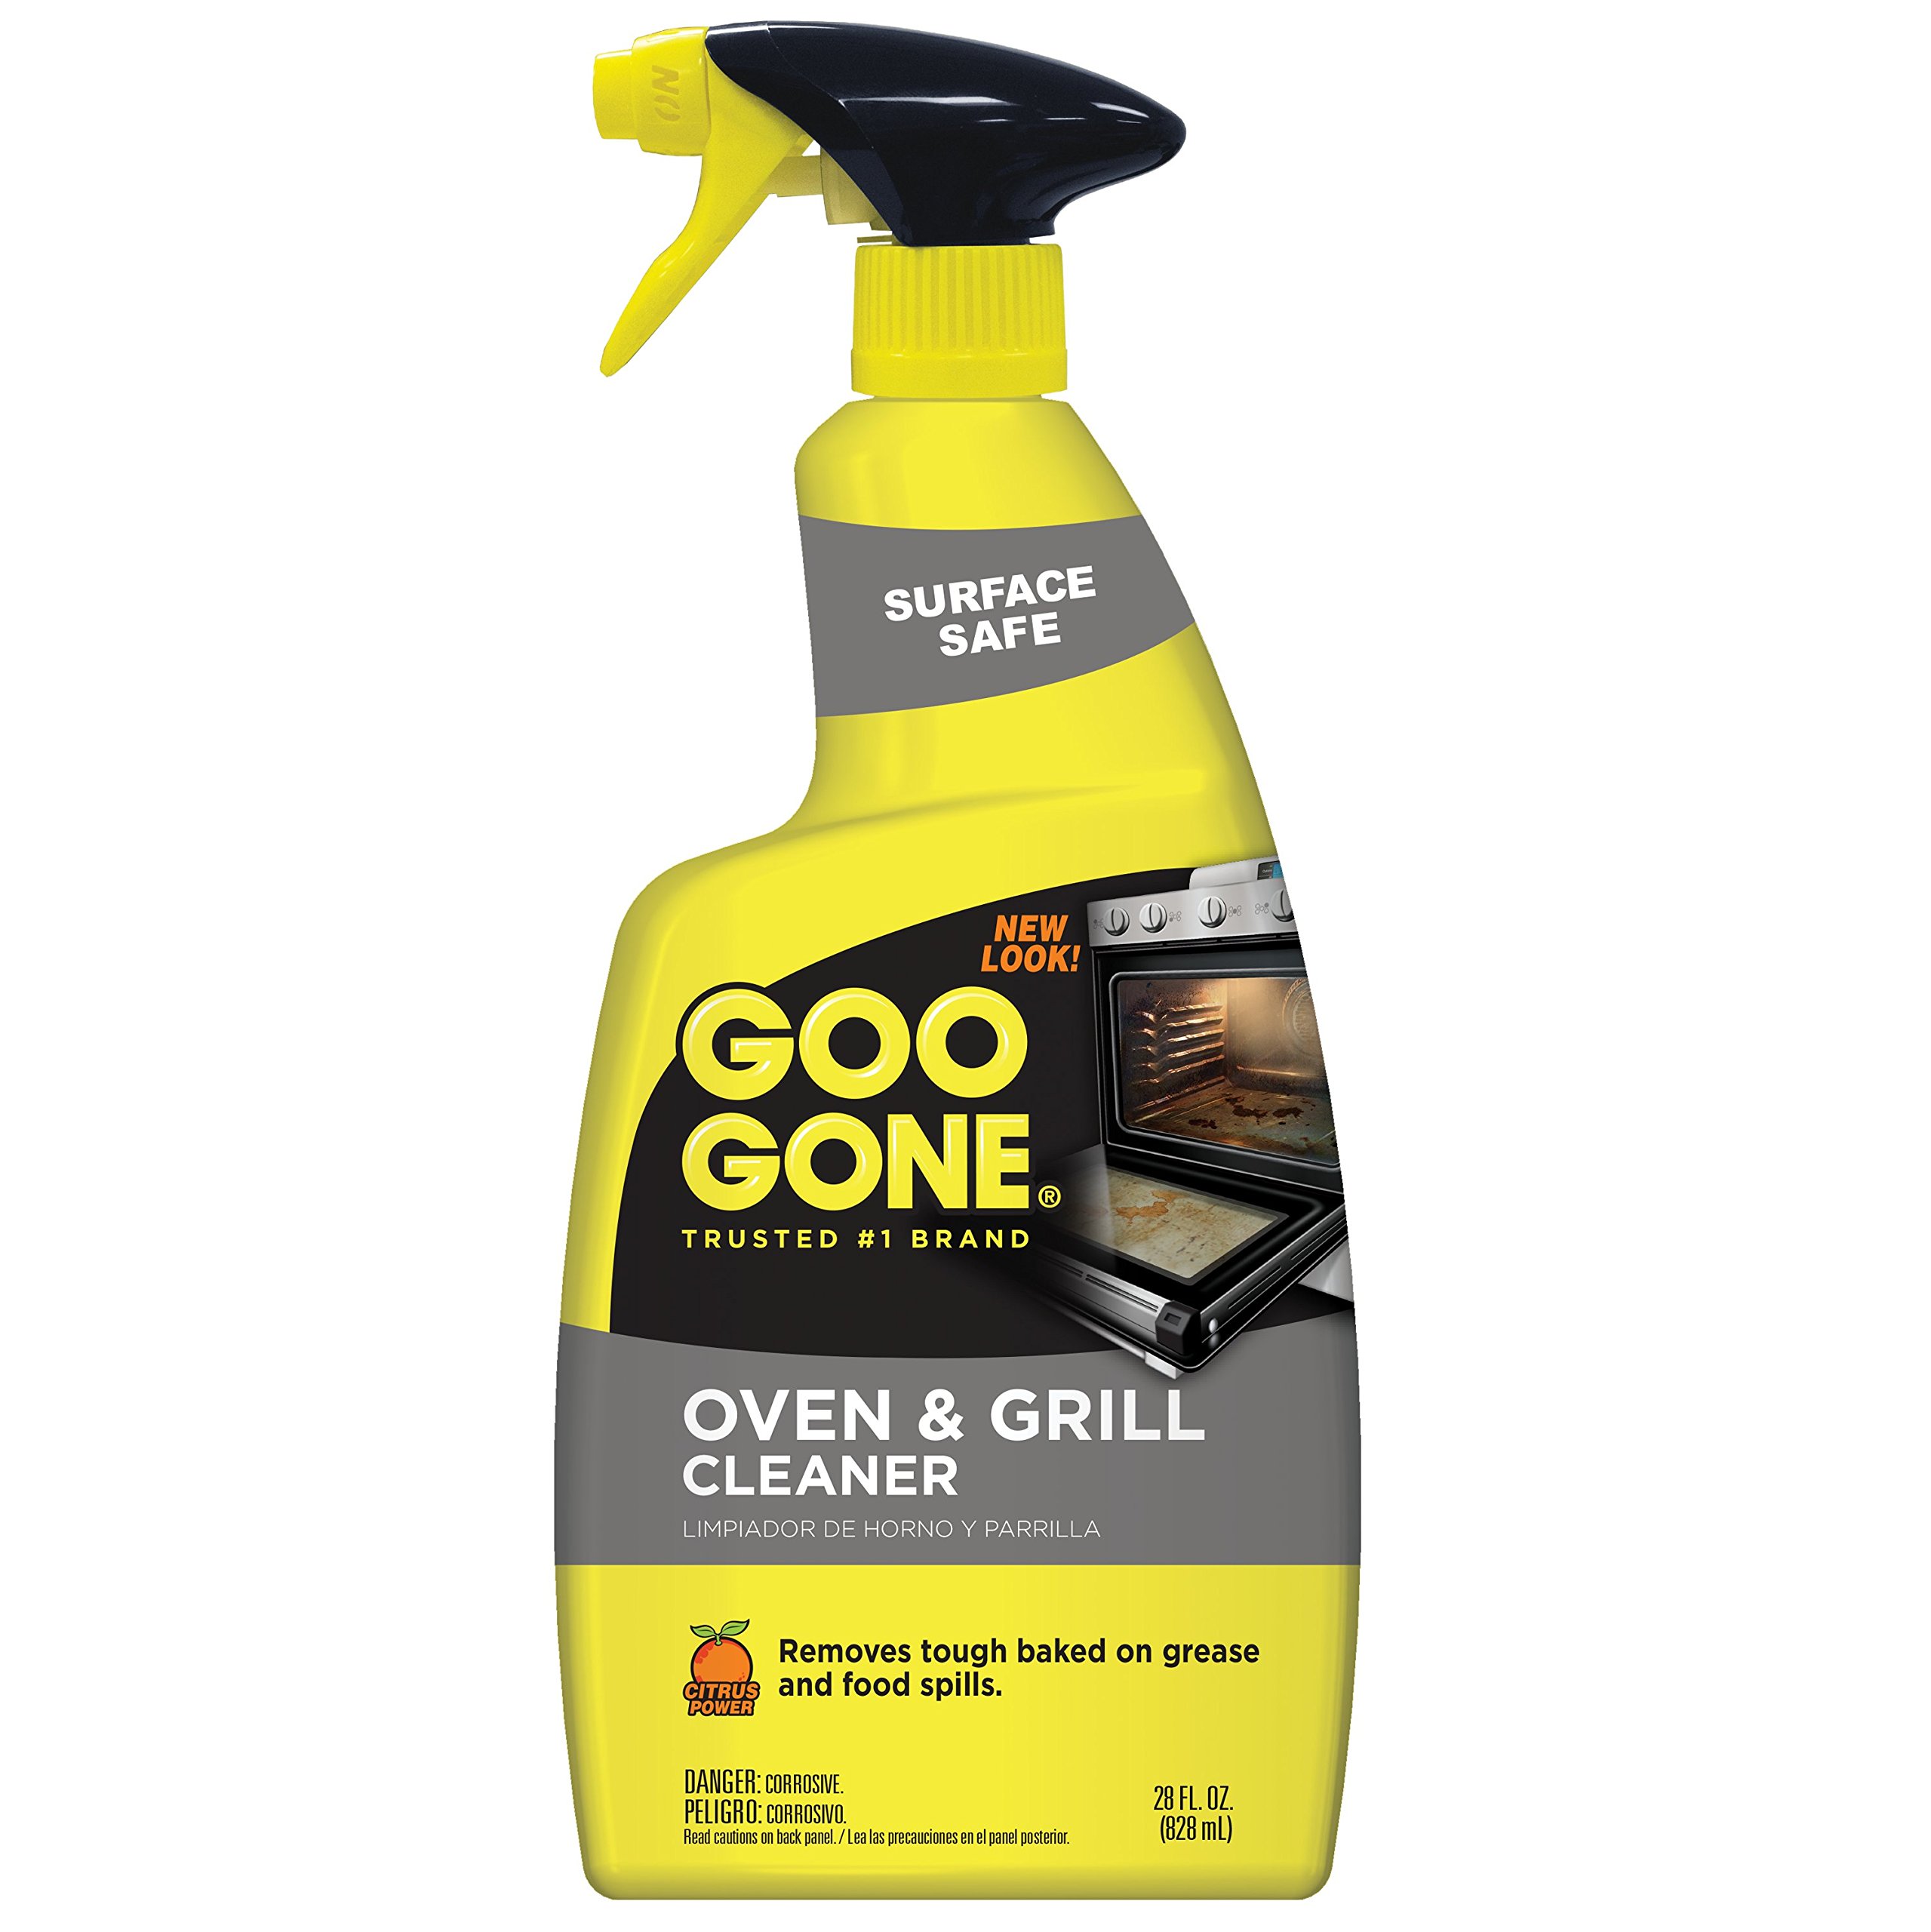 Goo Gone Pro-Power - Professional Strength Adhesive Remover - 128